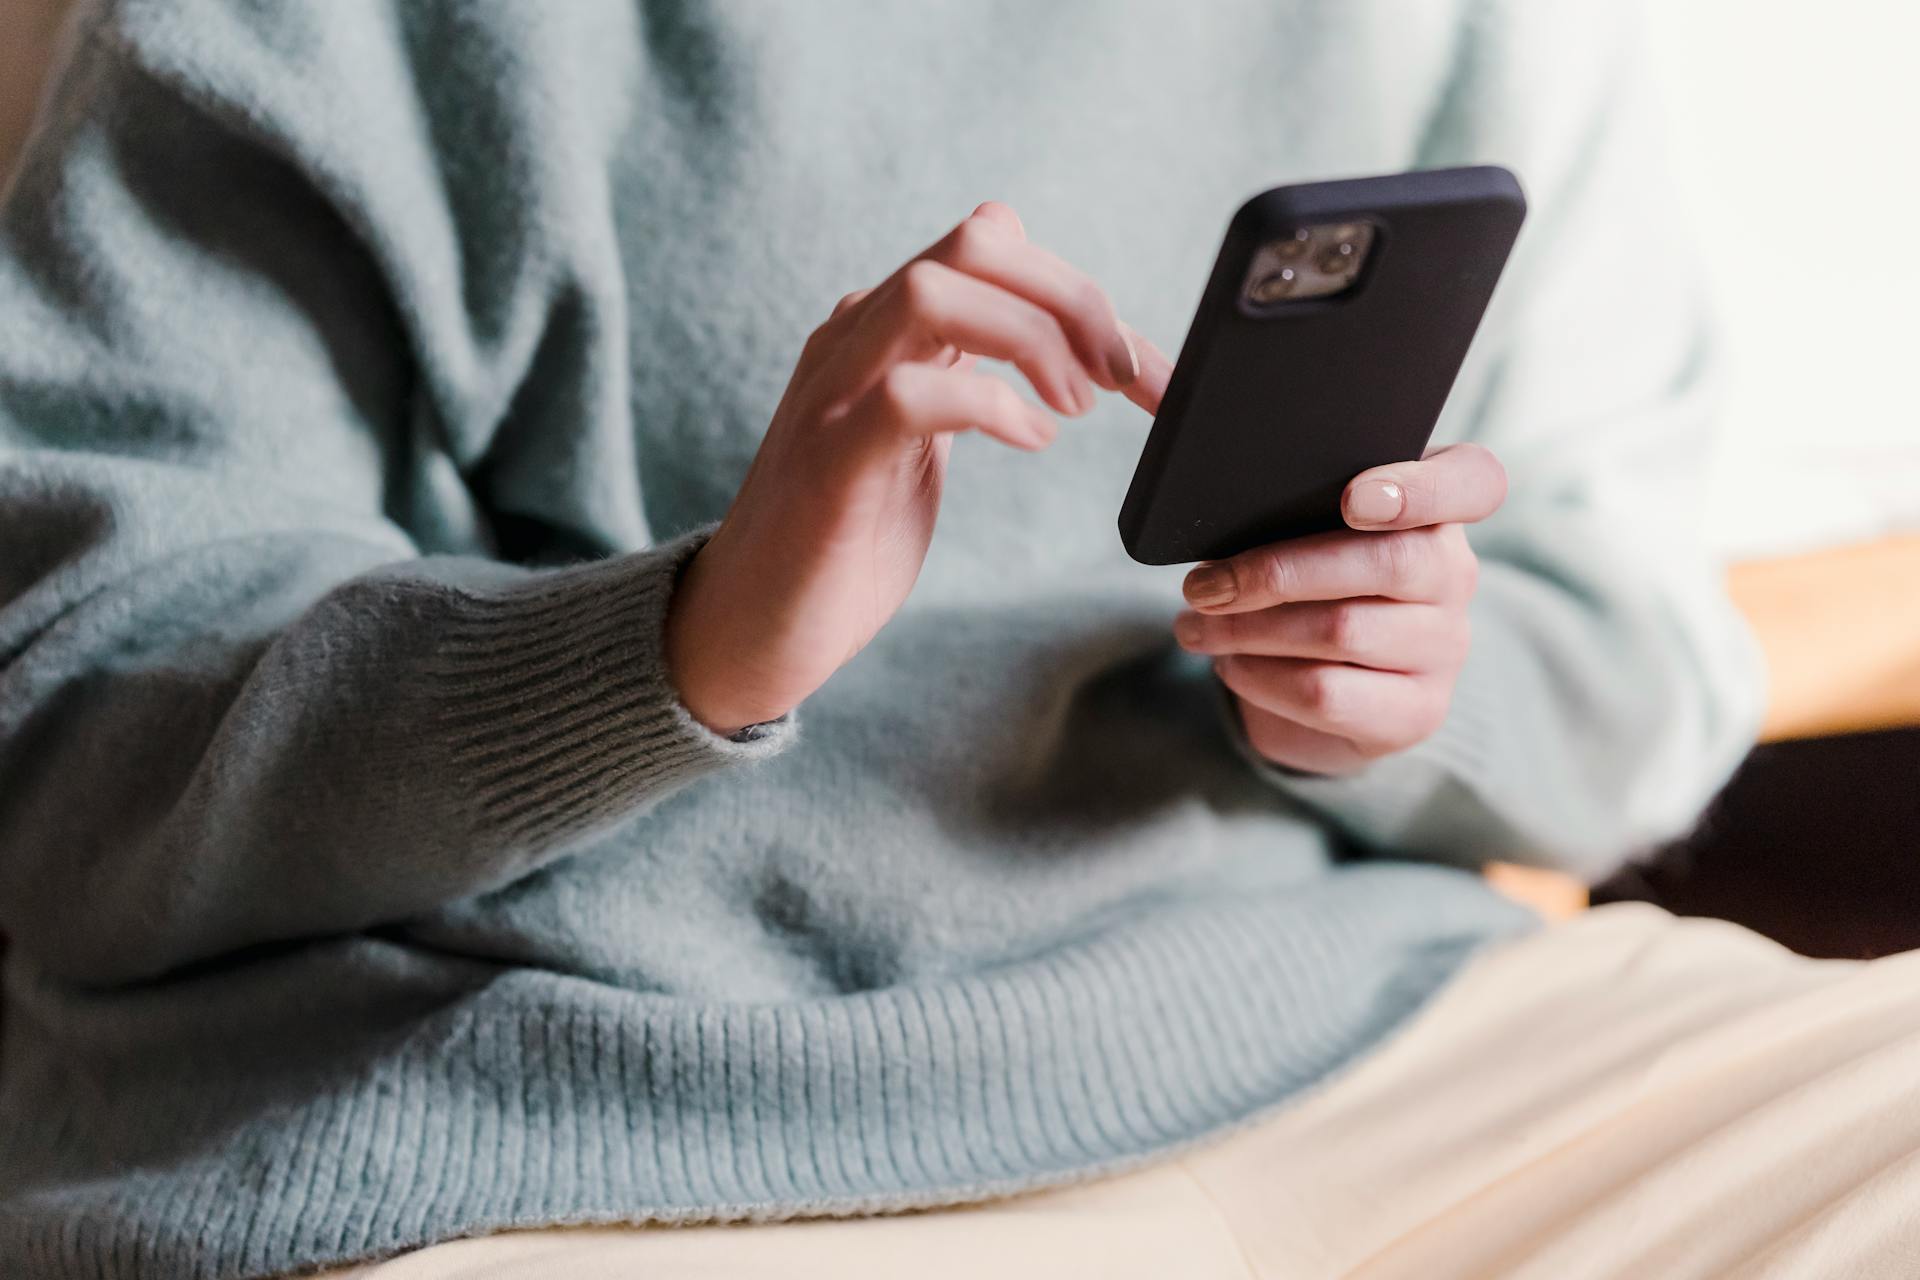 A woman scrolling on her phone | Source: Pexels